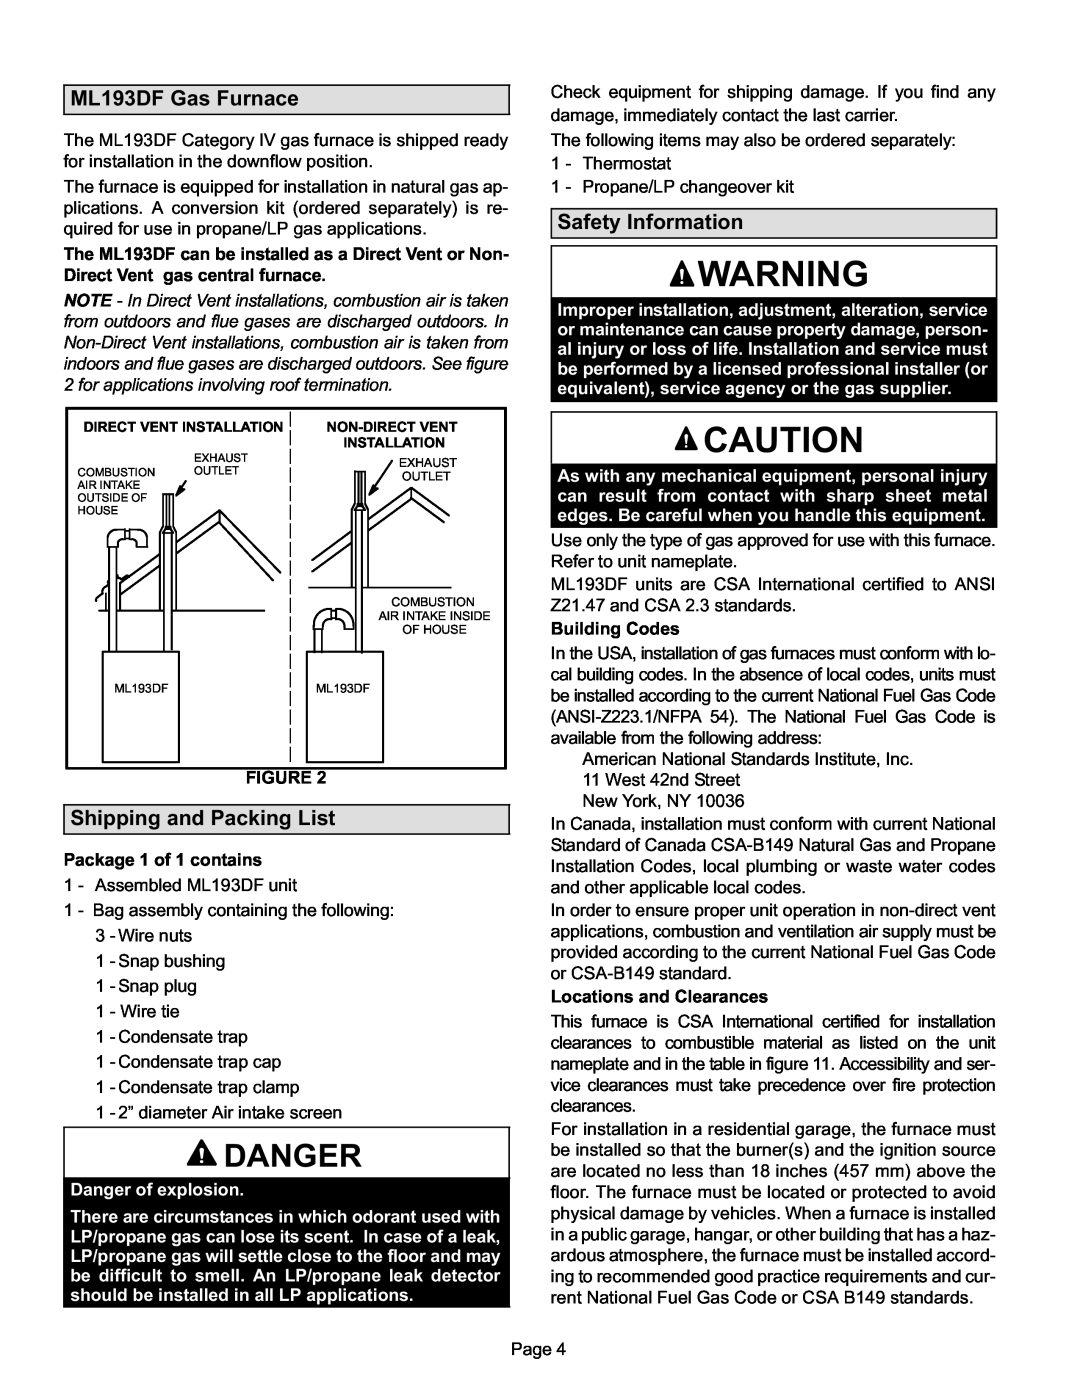 Lennox International Inc Danger, ML193DF Gas Furnace, Shipping and Packing List, Safety Information 